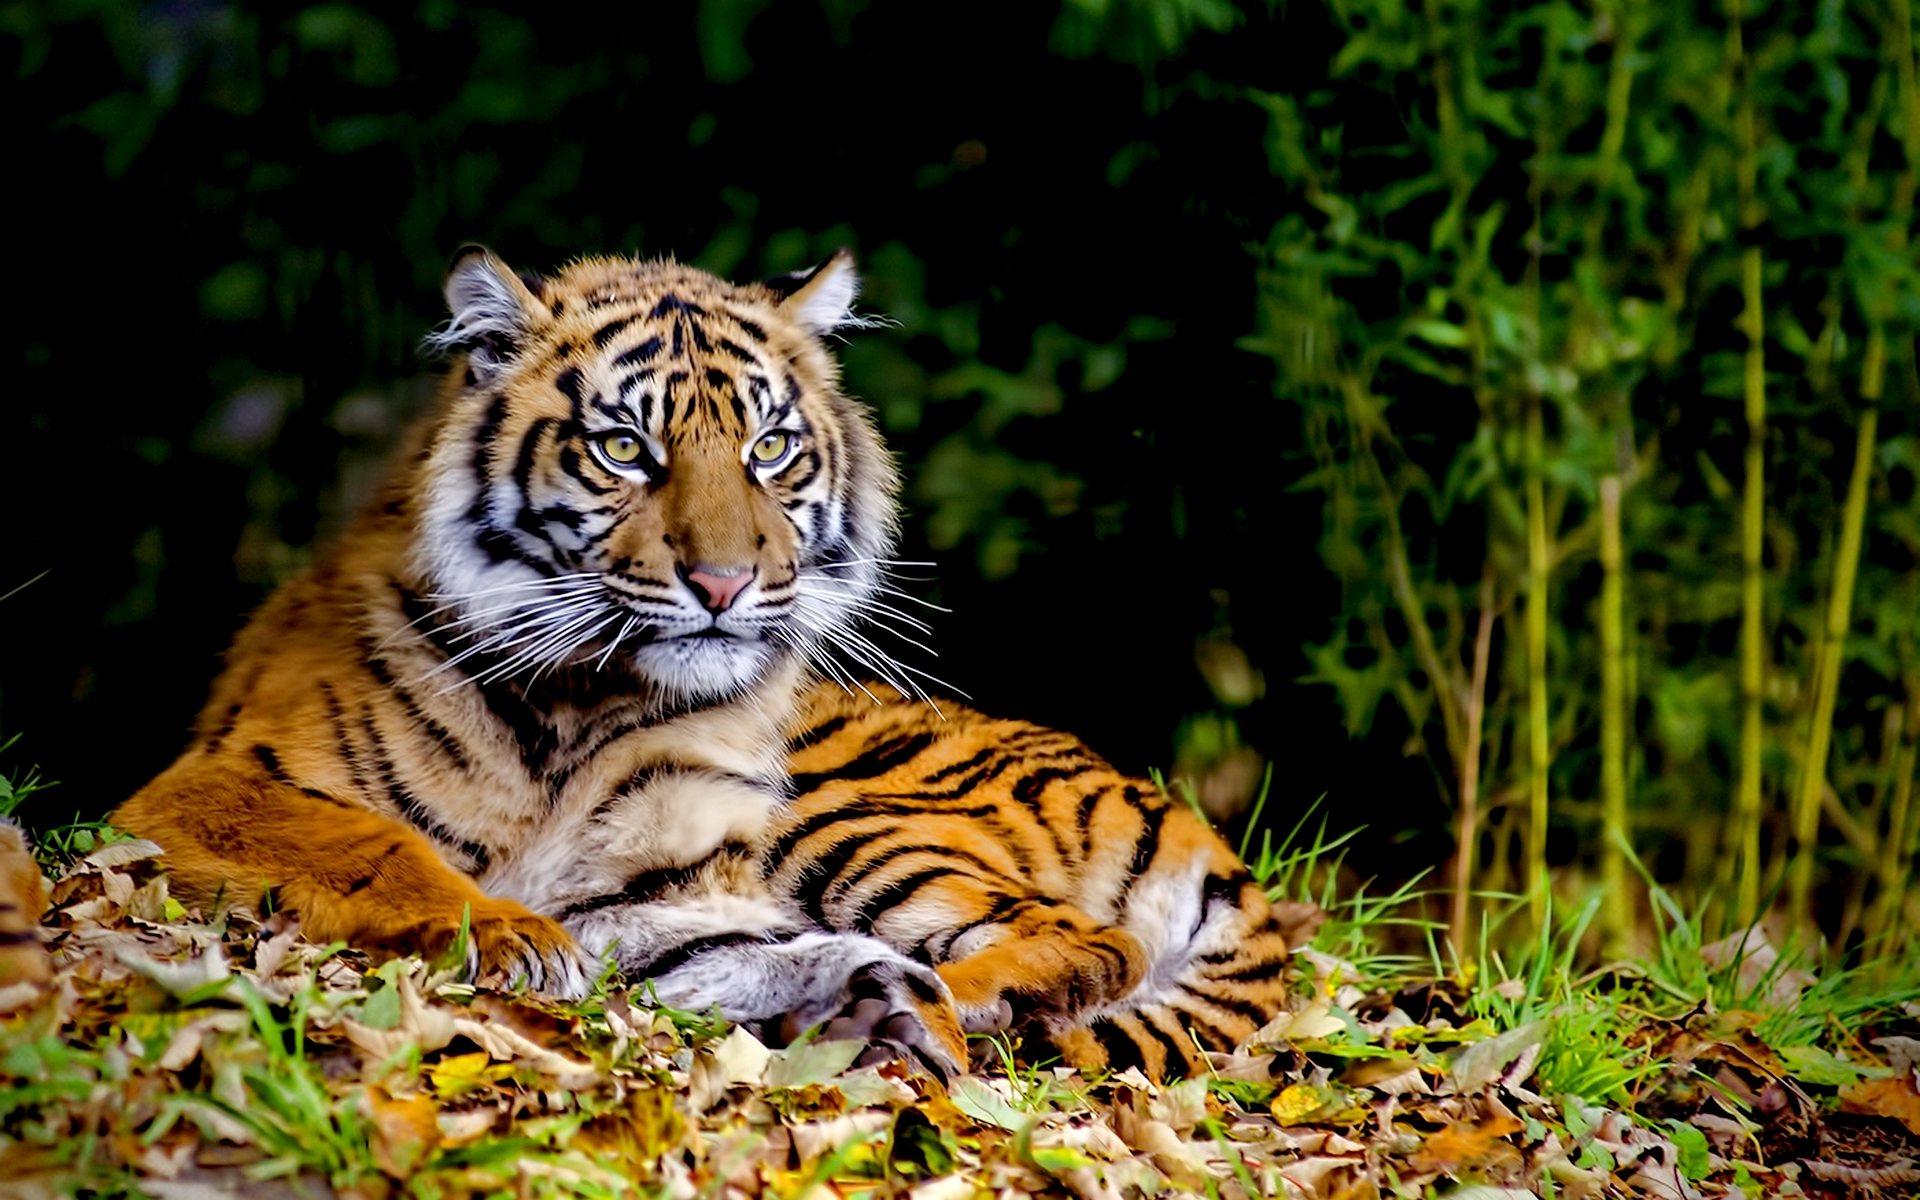 Free photo A tiger resting on a lawn with fallen leaves